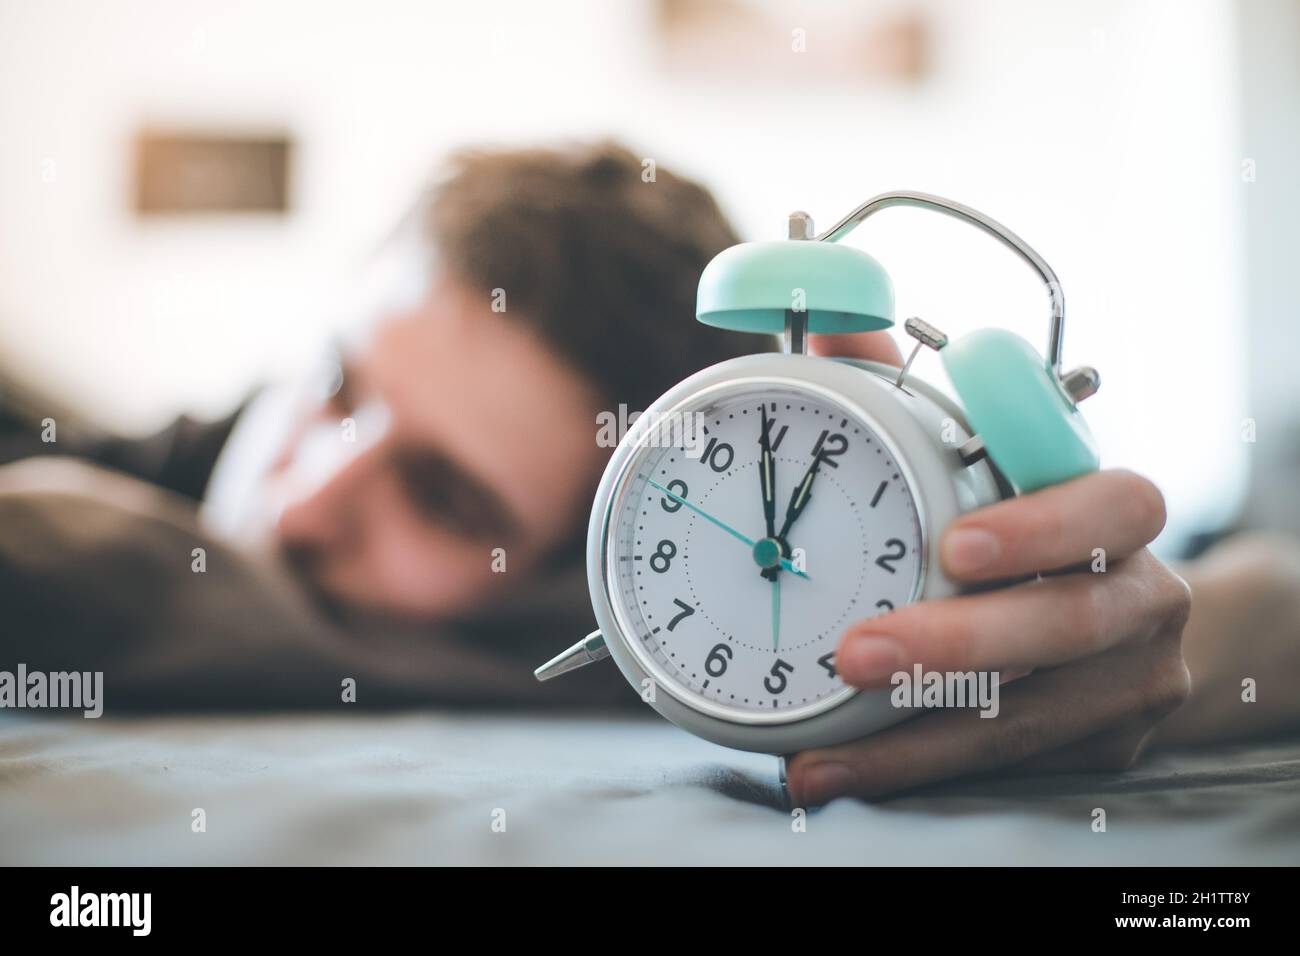 White alarm clock in the morning. Young man sleeps in the background. Stock Photo